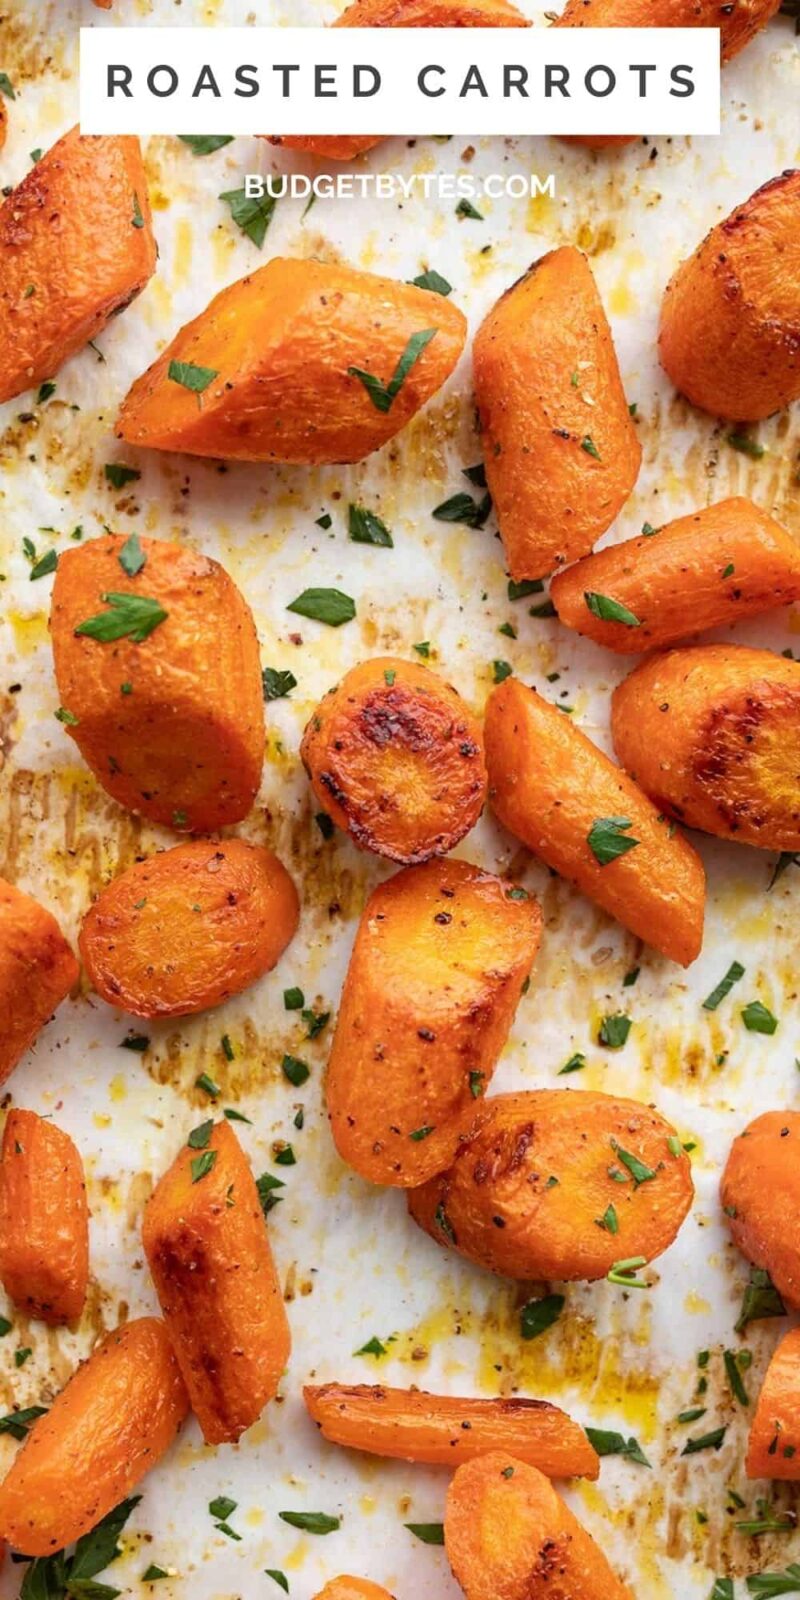 roasted carrots on a baking sheet with title text at the top.